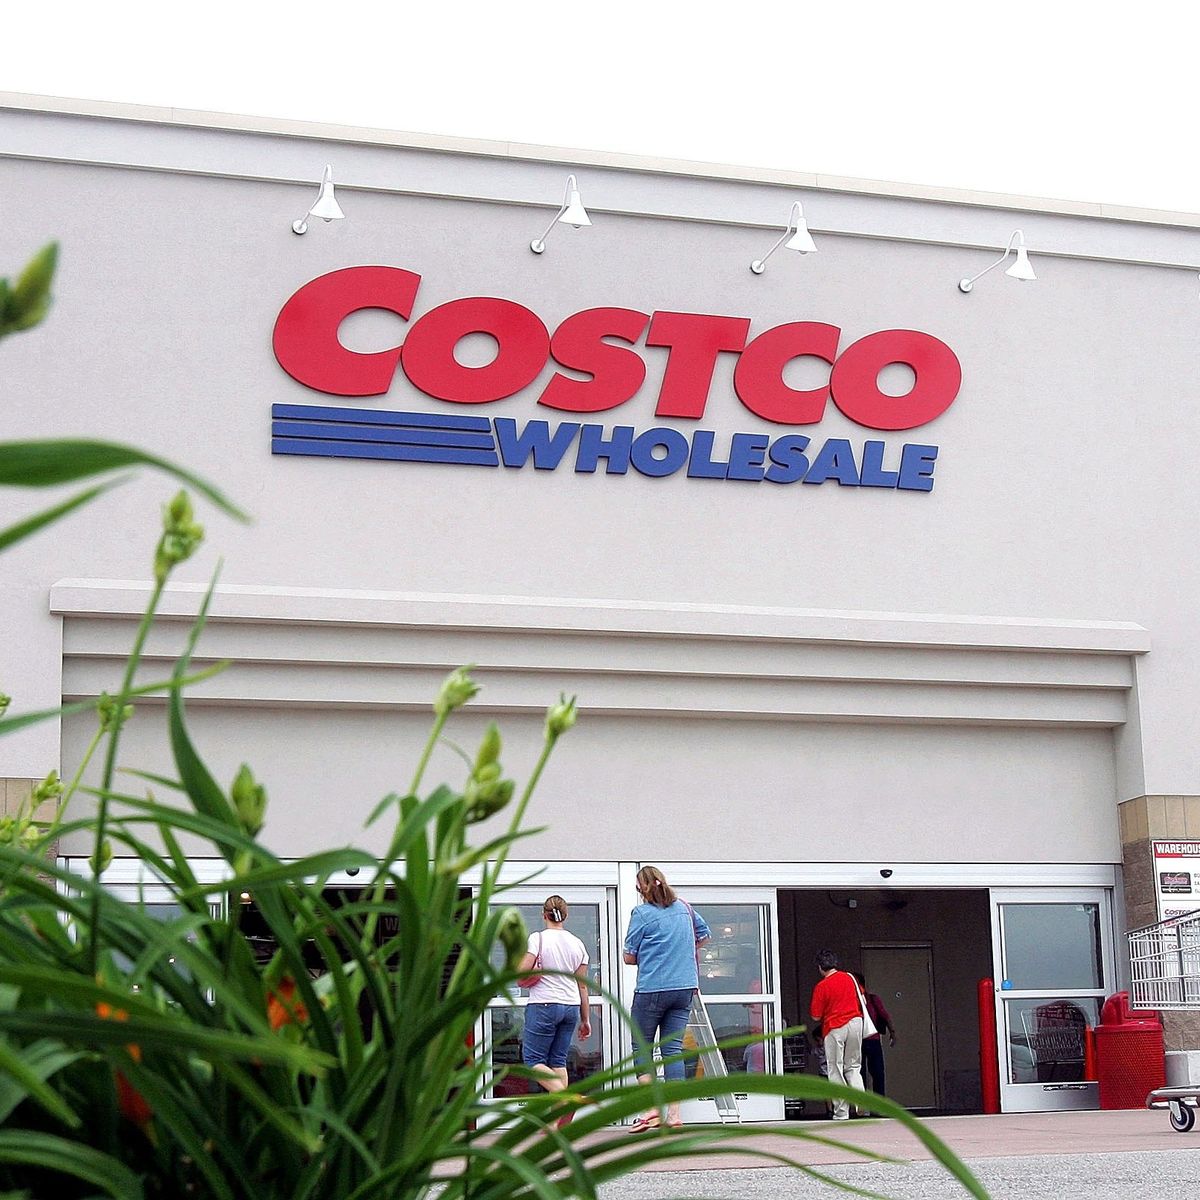 https://hips.hearstapps.com/hmg-prod/images/worker-pushes-carts-outside-a-costco-wholesale-store-may-31-news-photo-1594053758.jpg?crop=0.537xw:1xh;center,top&resize=1200:*